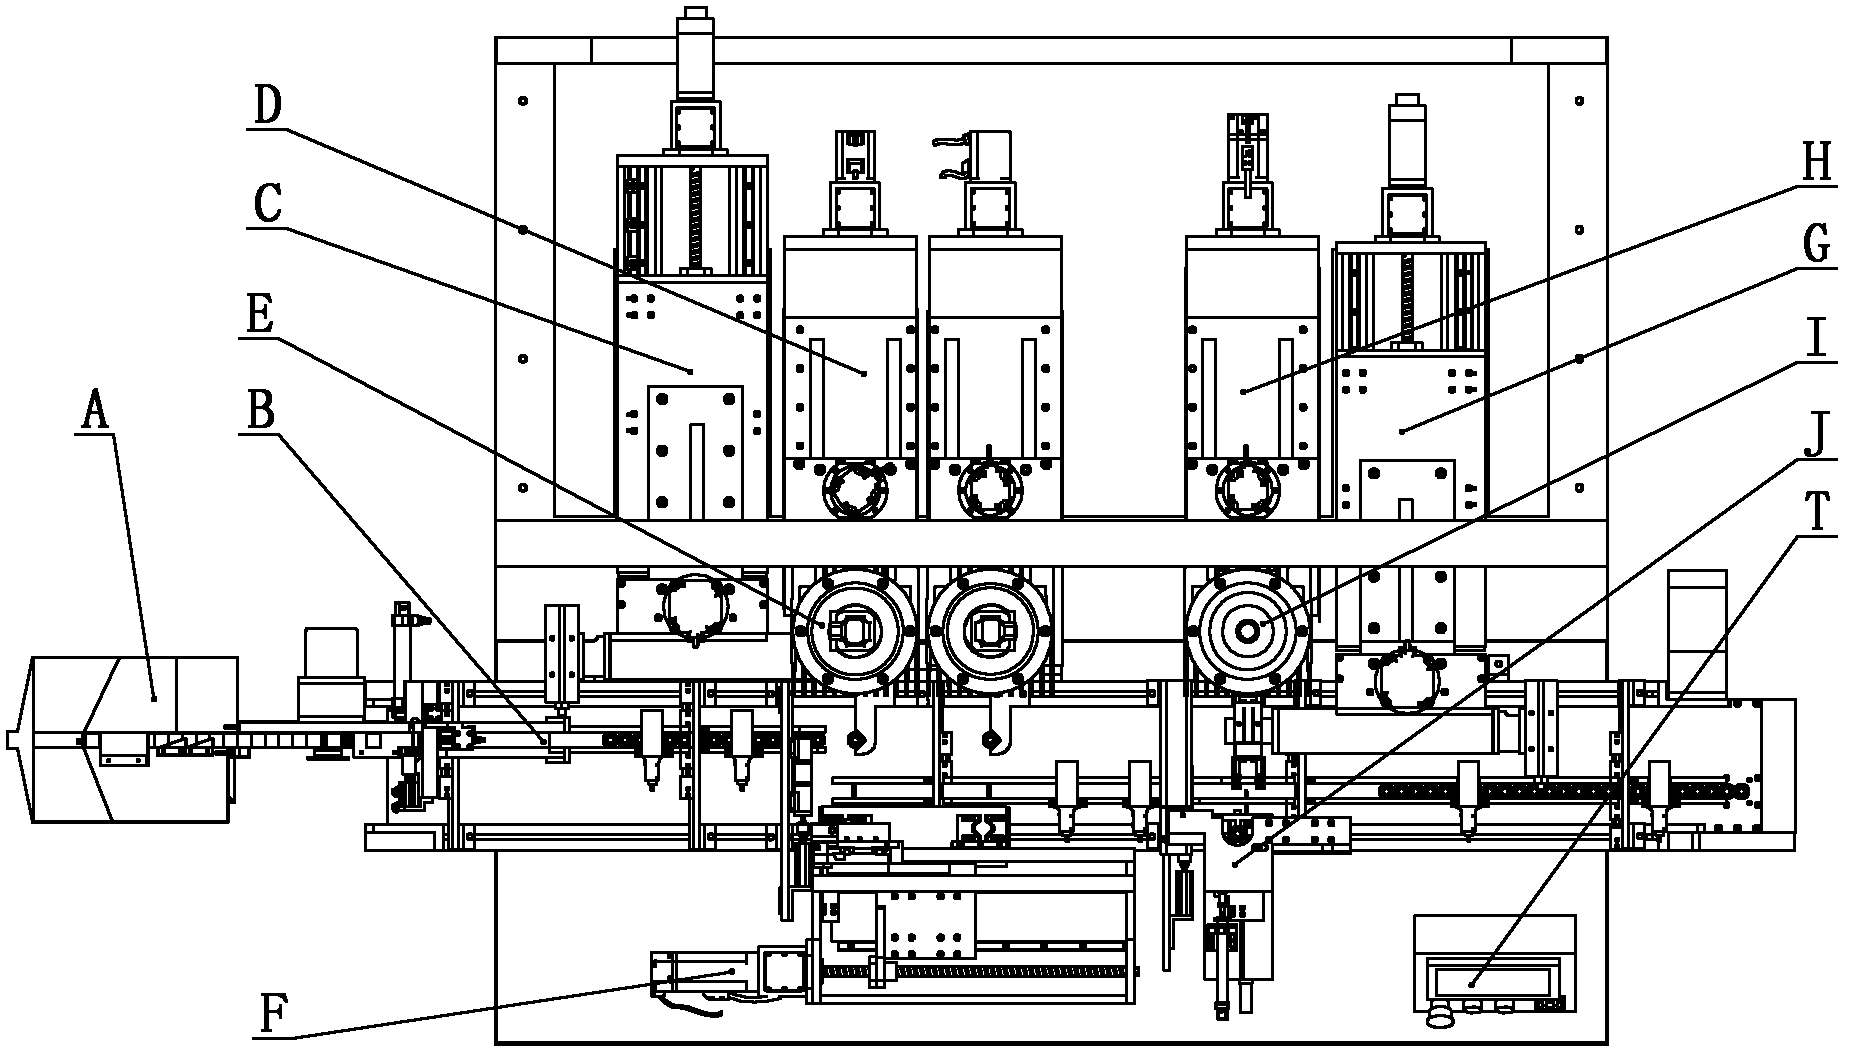 Full automatic lathe for inner circle and outer circle of commutator